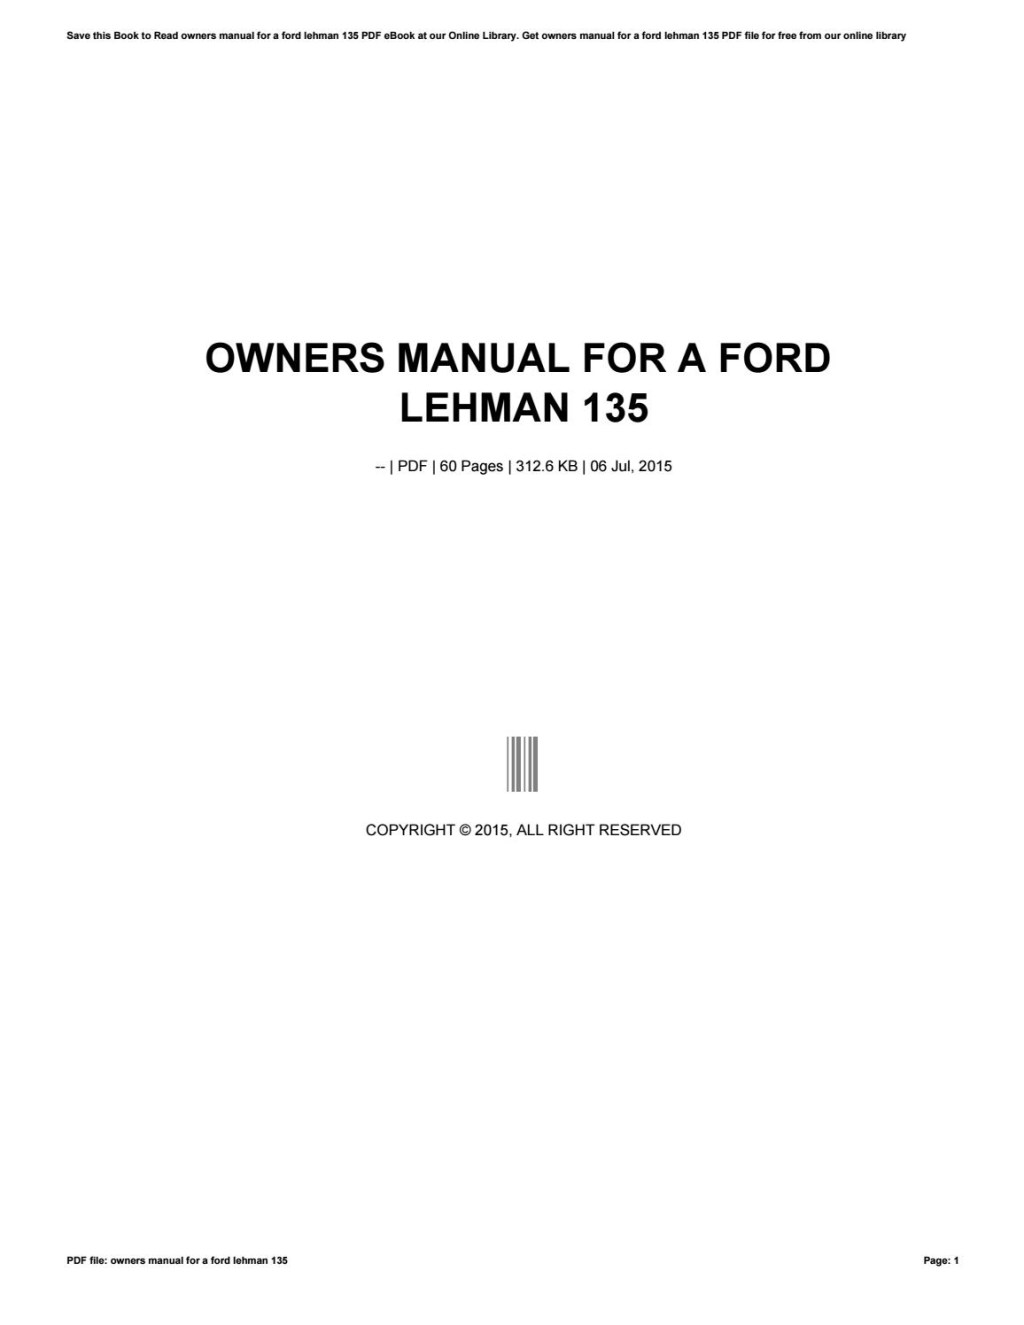 Picture of: Owners manual for a ford lehman  by crymail – Issuu